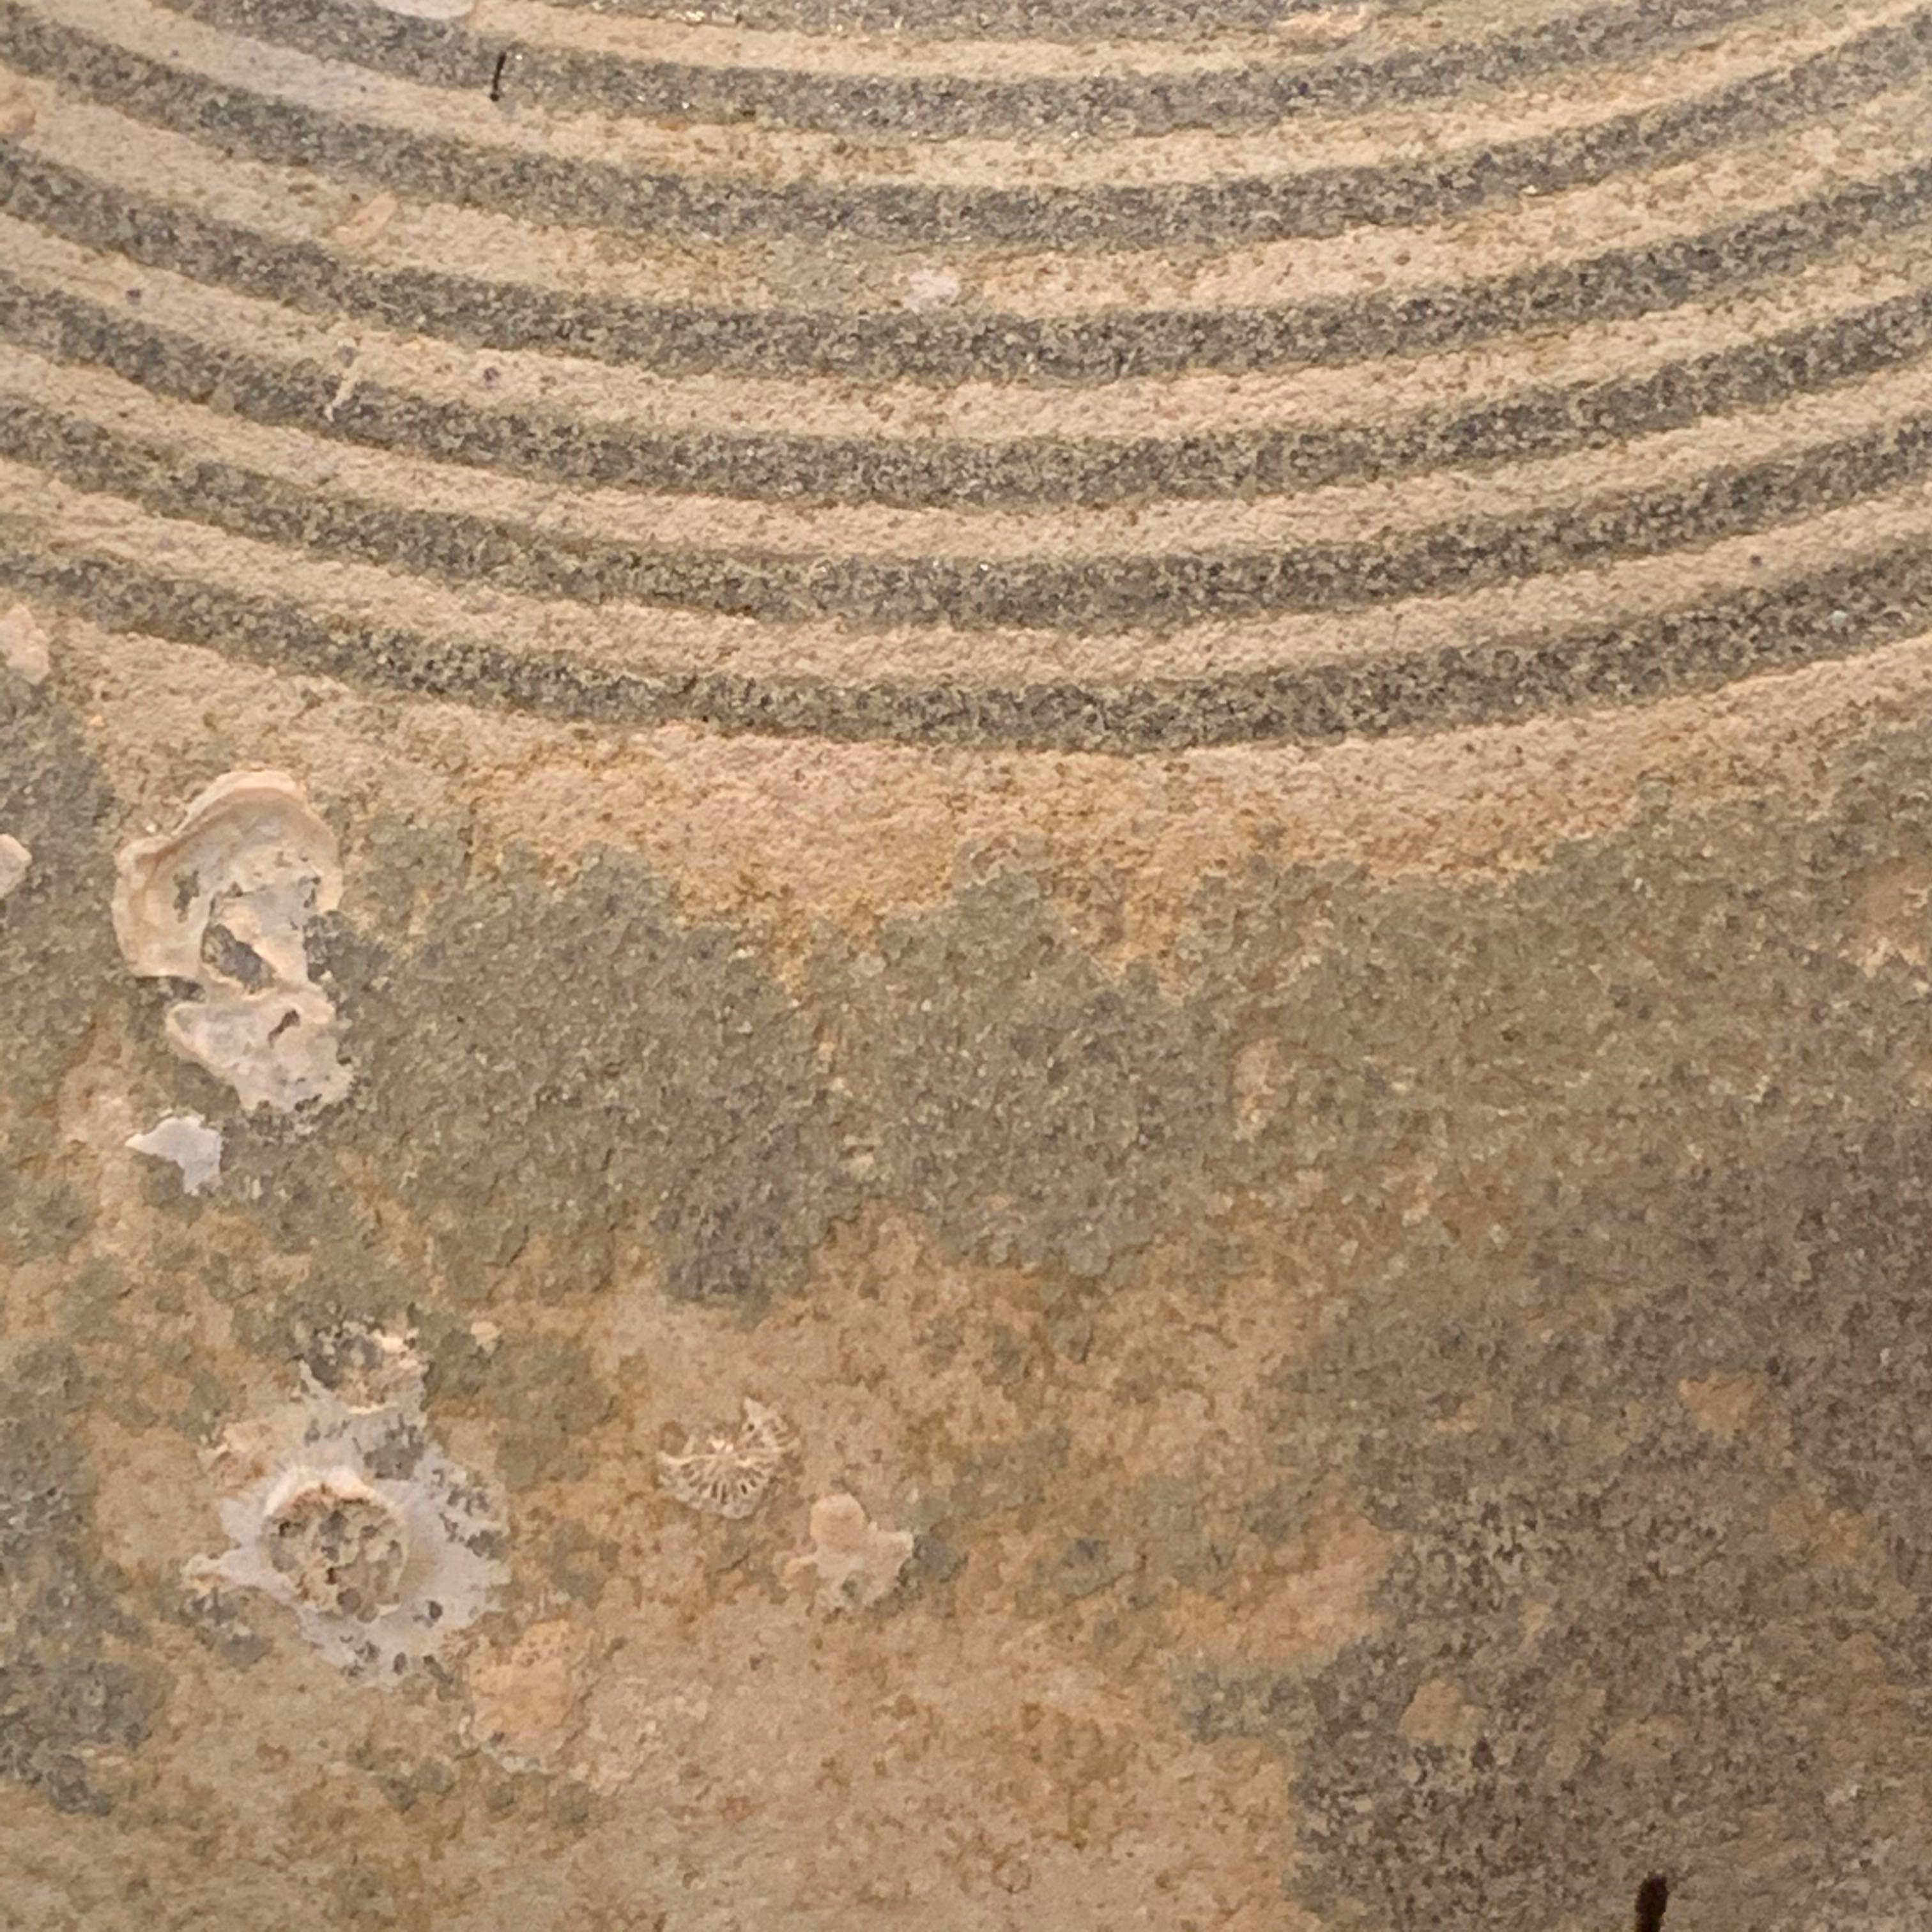 Weathered Neutral Color Shipwrecked Terra Cotta Pot, Vietnam, 15th Century 3